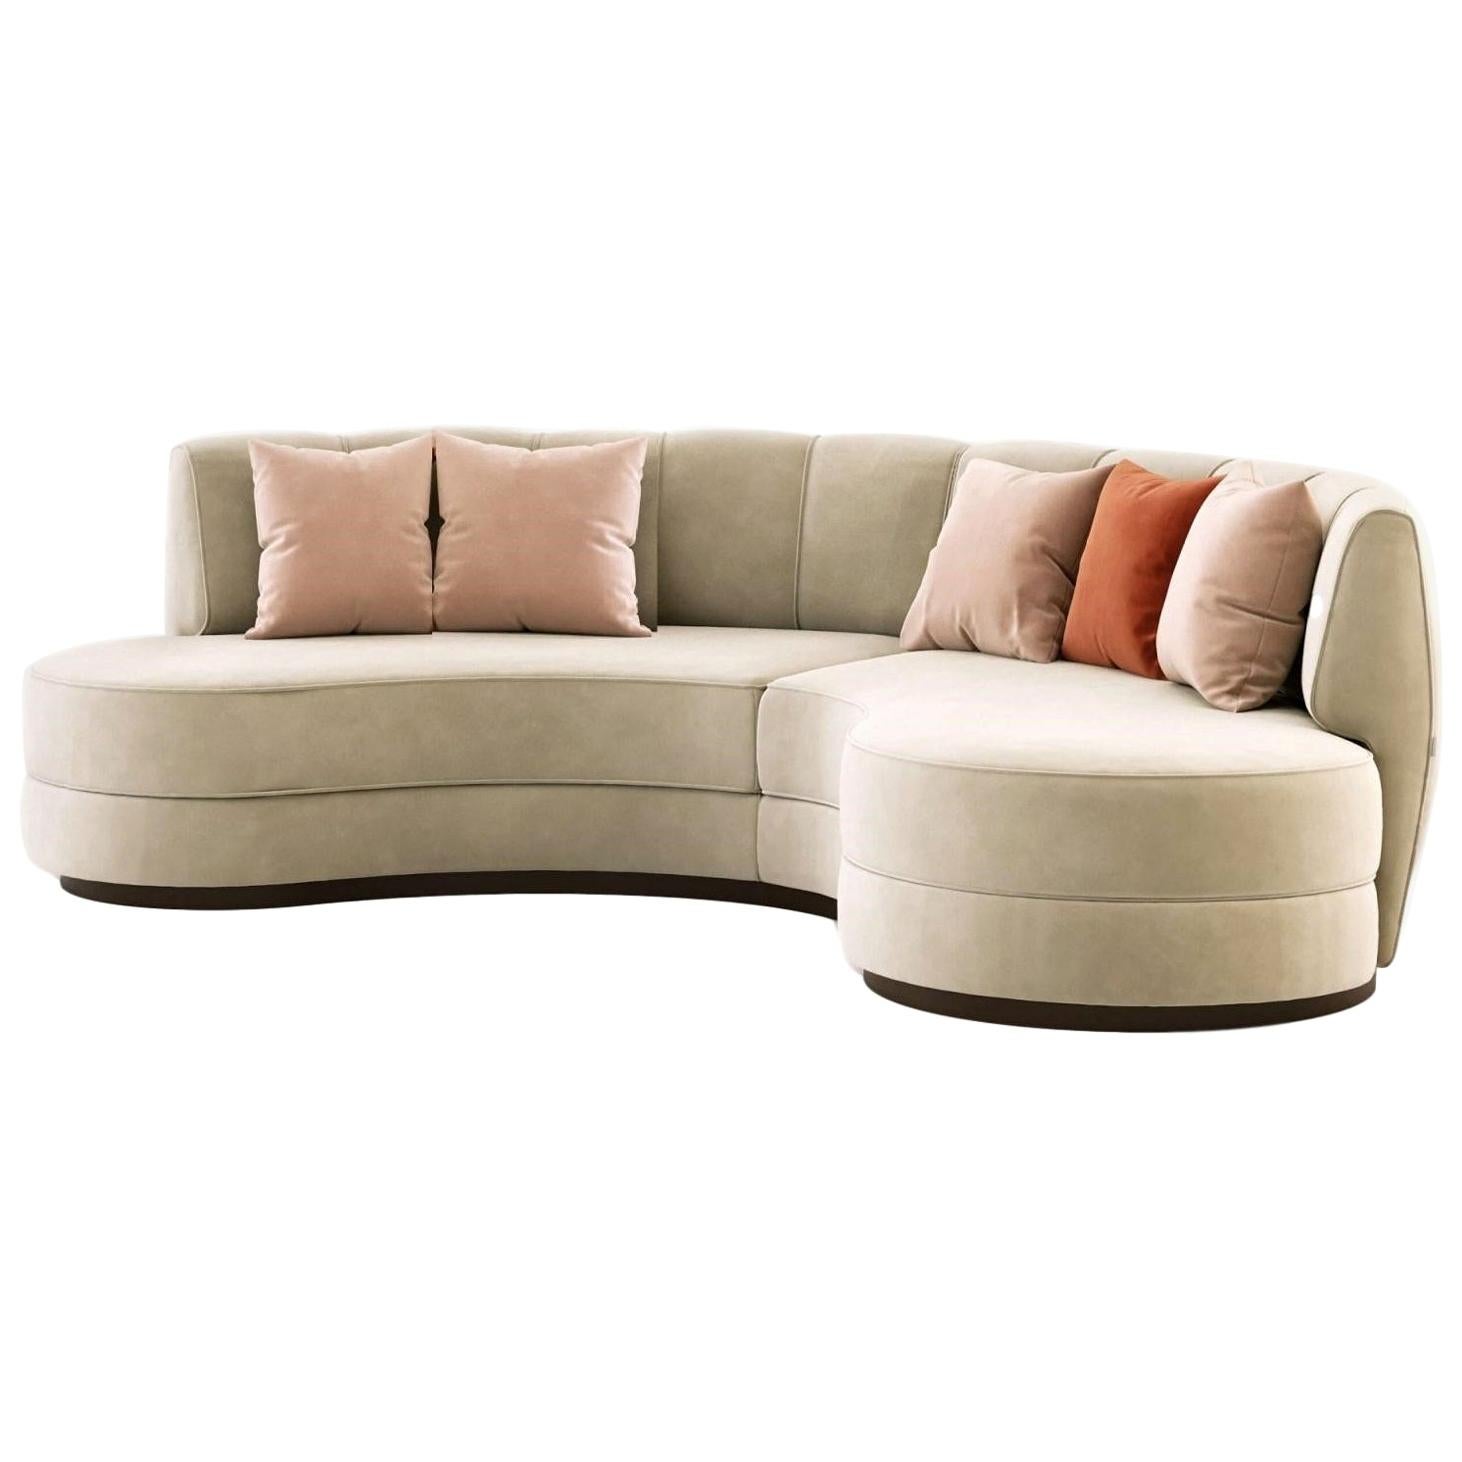 Contemporary Curved Sofa in Linen Beige Velvet For Sale 1stDibs | curved sofa ikea, curved sofa dimensions, curved sofas for sale